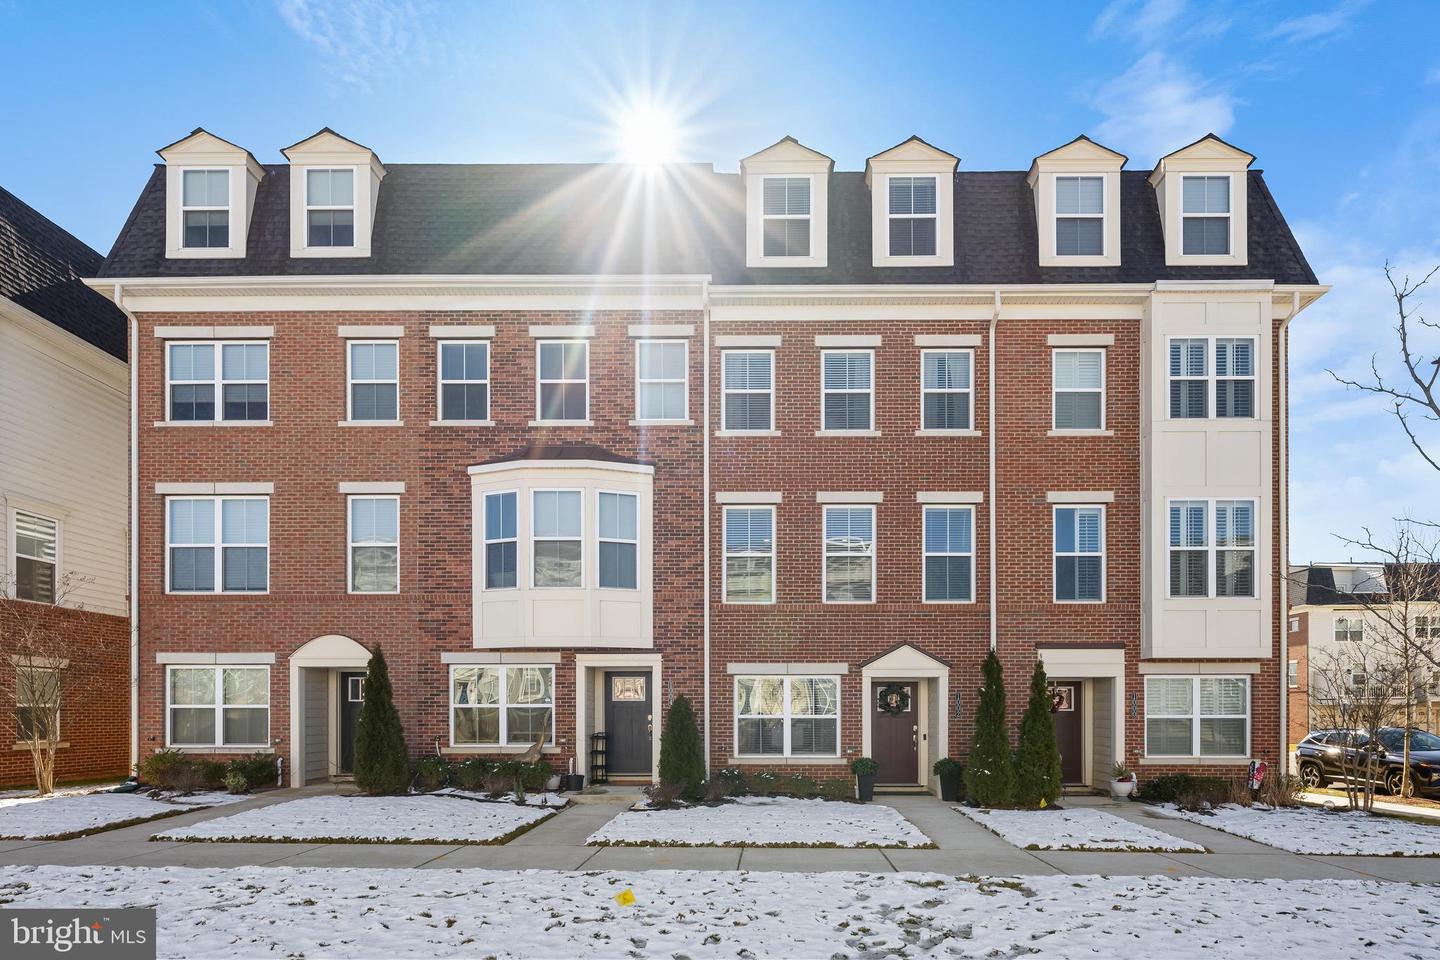 View Frederick, MD 21701 townhome